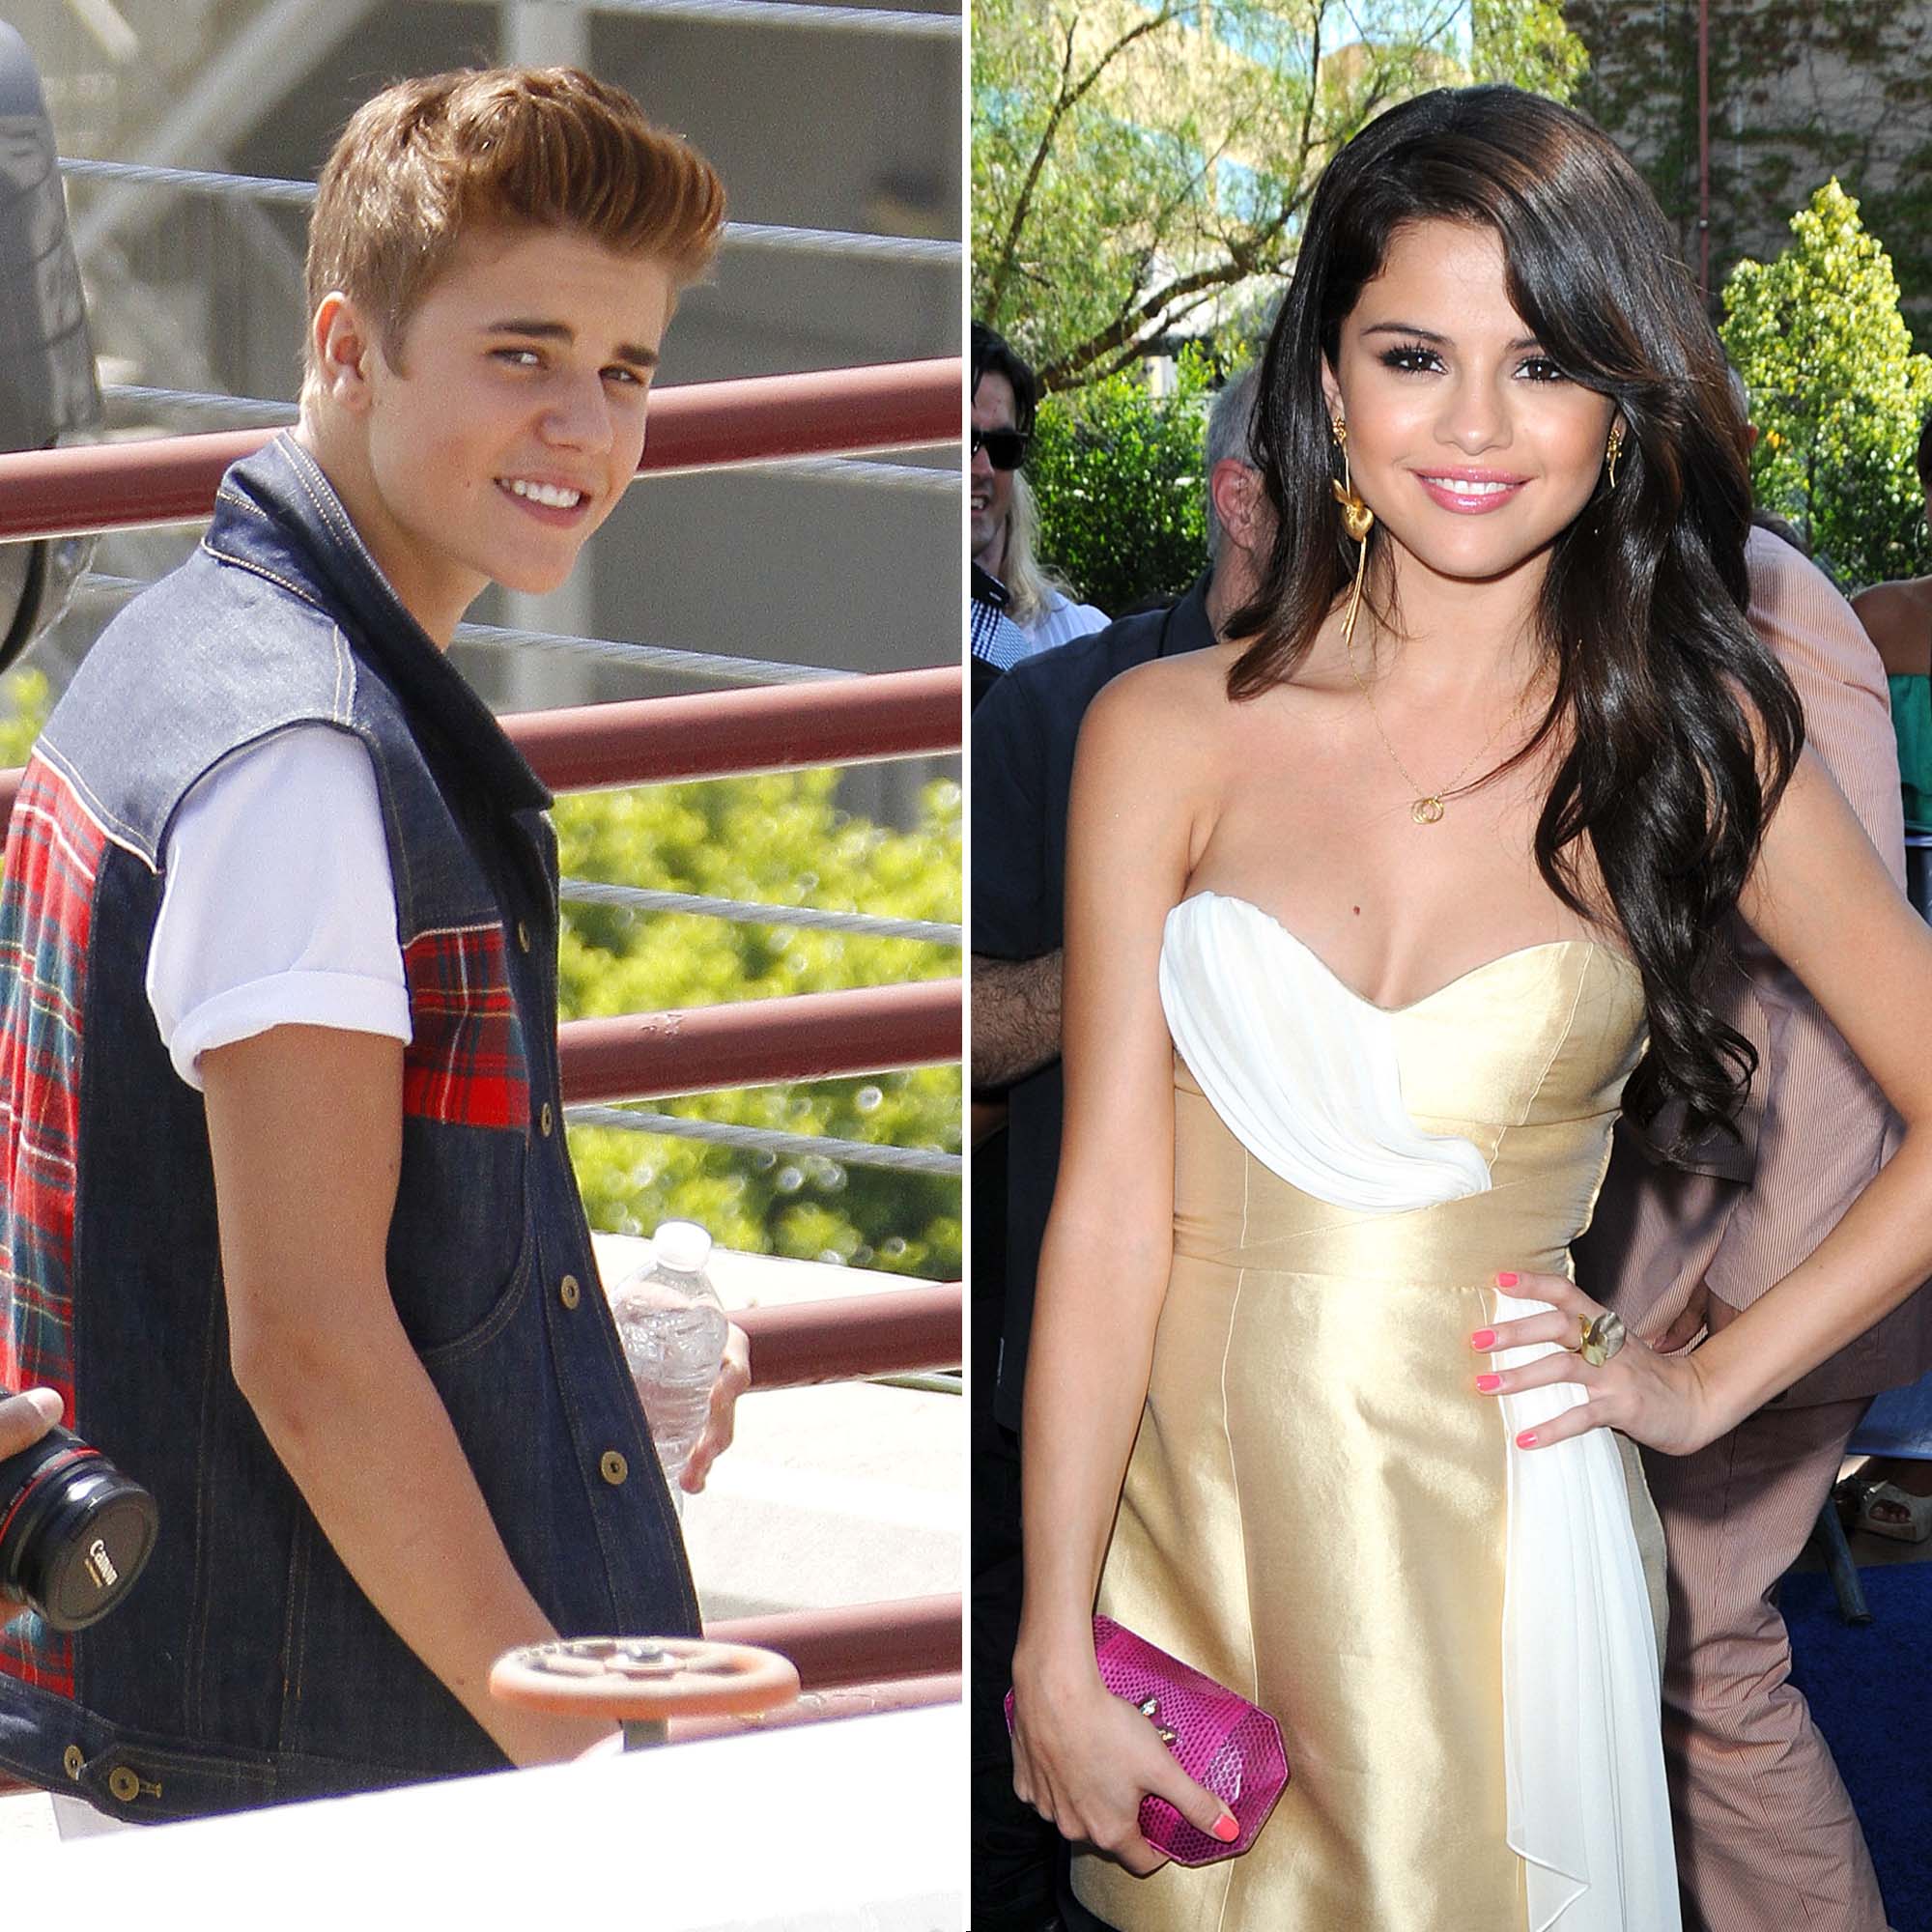 Justin Bieber and Selena Gomez A Timeline of Their Relationship